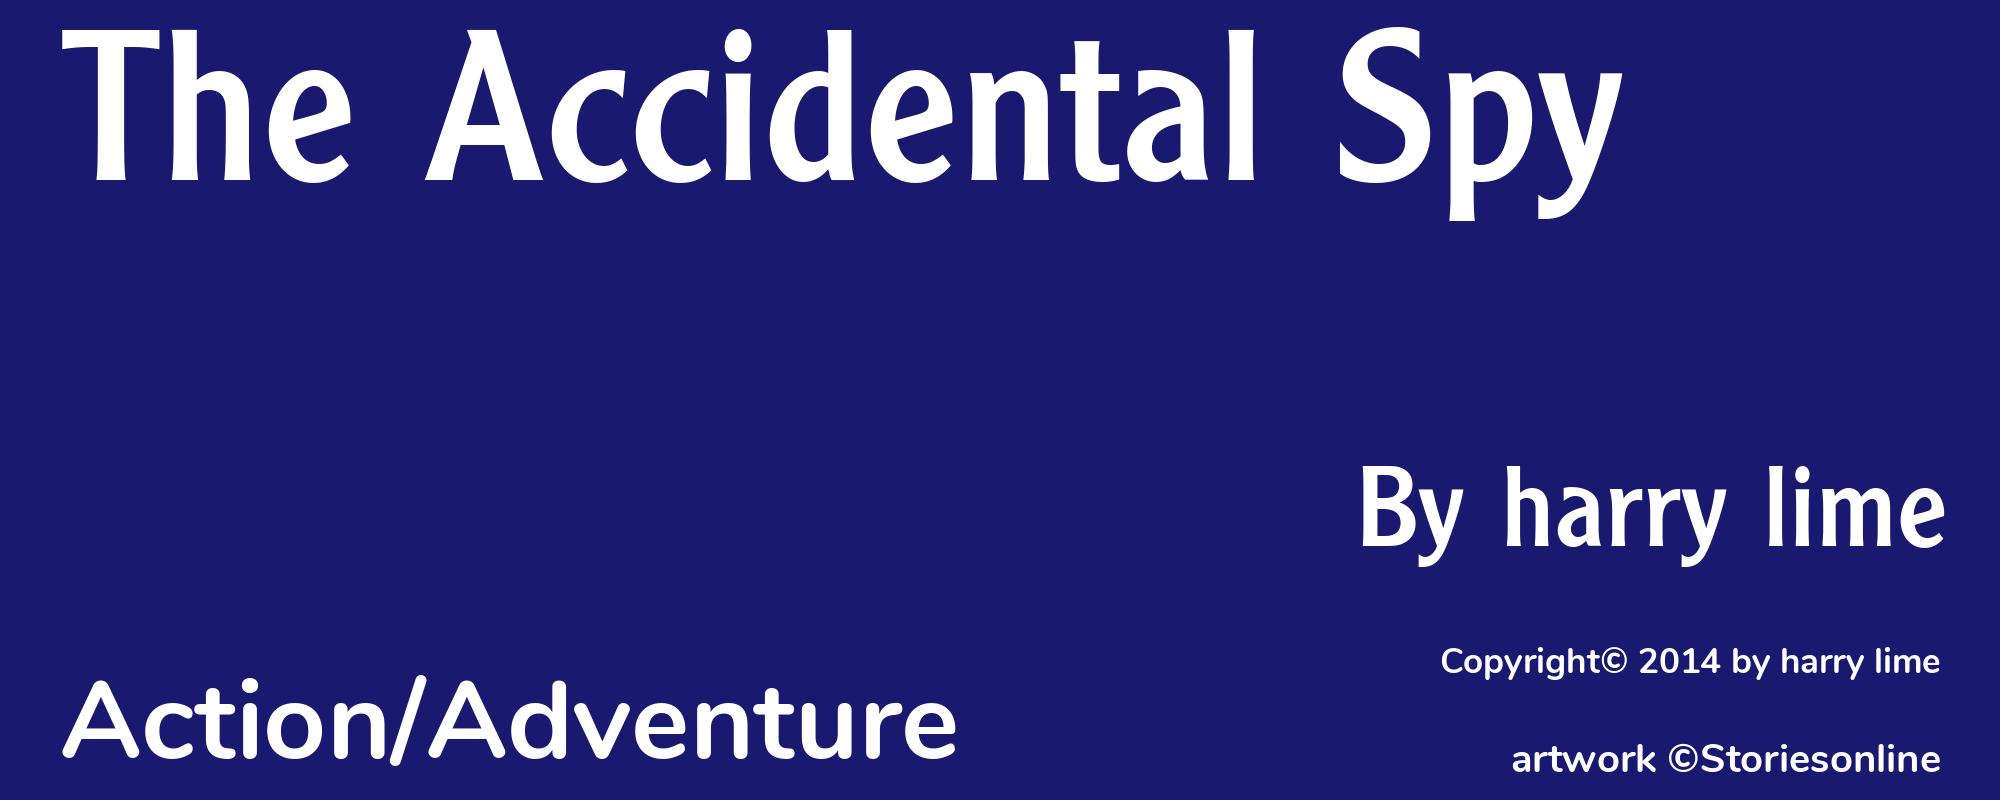 The Accidental Spy - Cover